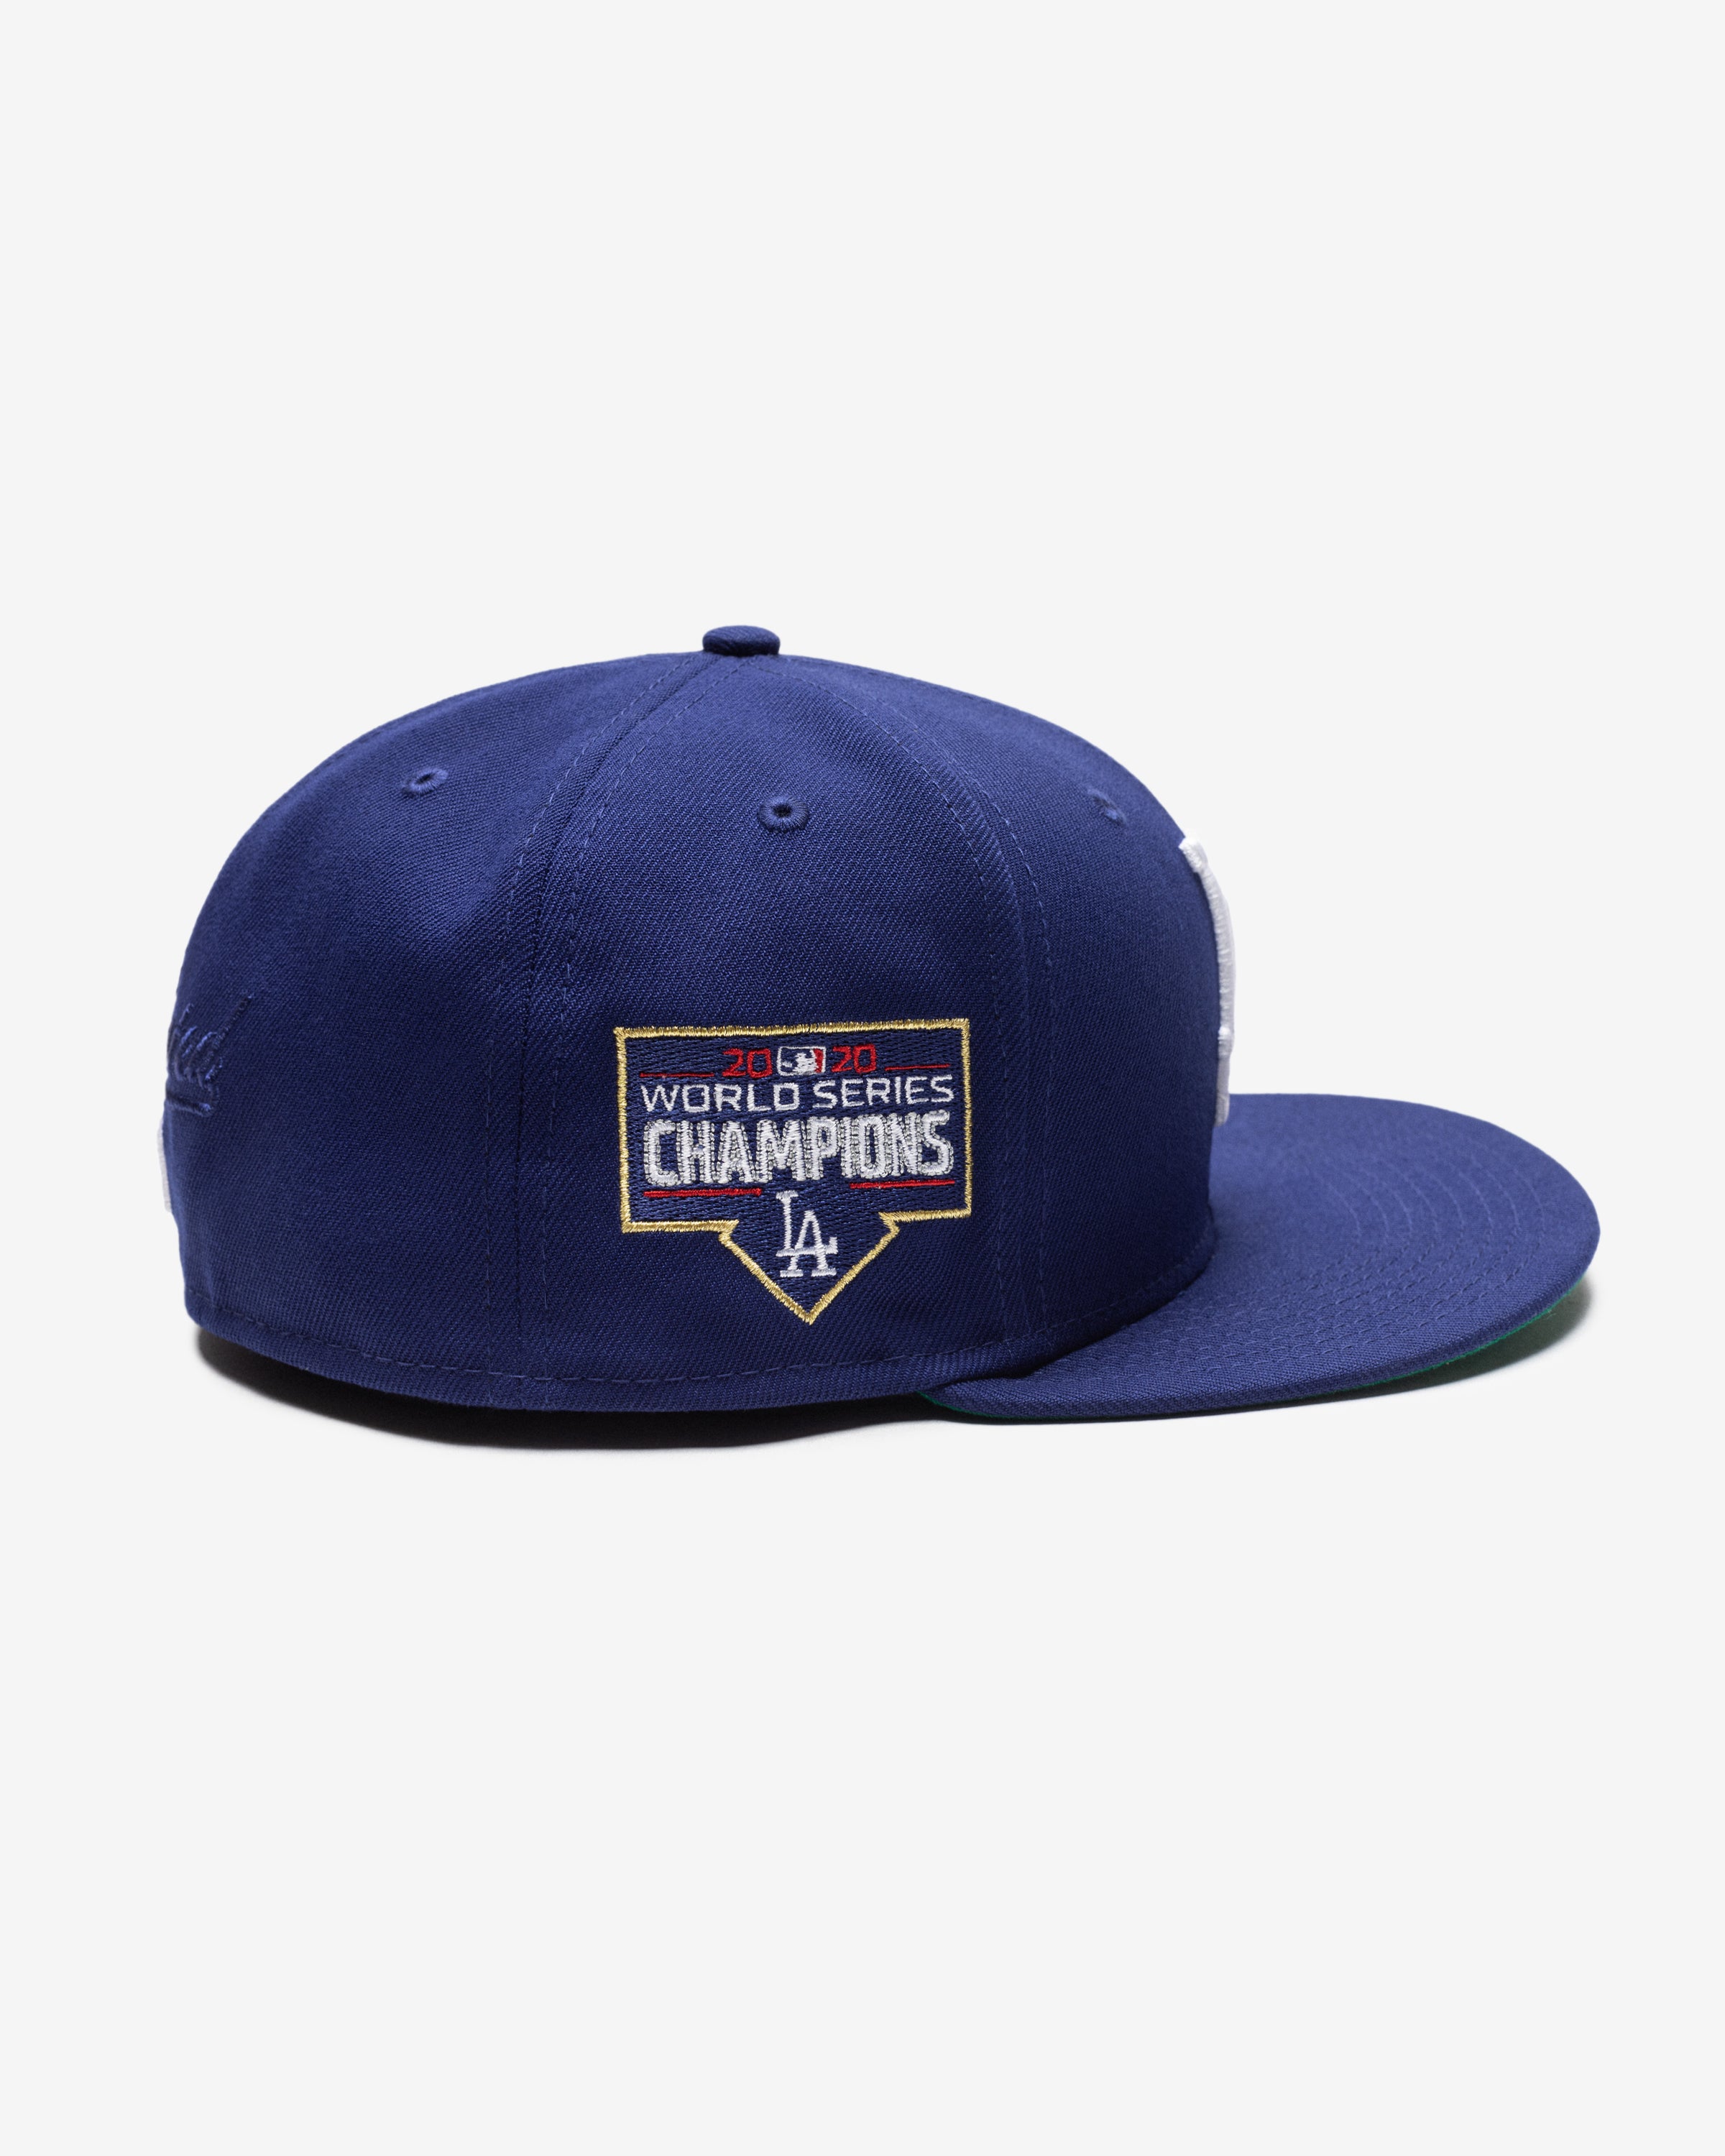 UNDEFEATED X LA DODGERS WORLD CHAMPIONS NEW ERA 59FIFTY FITTED 